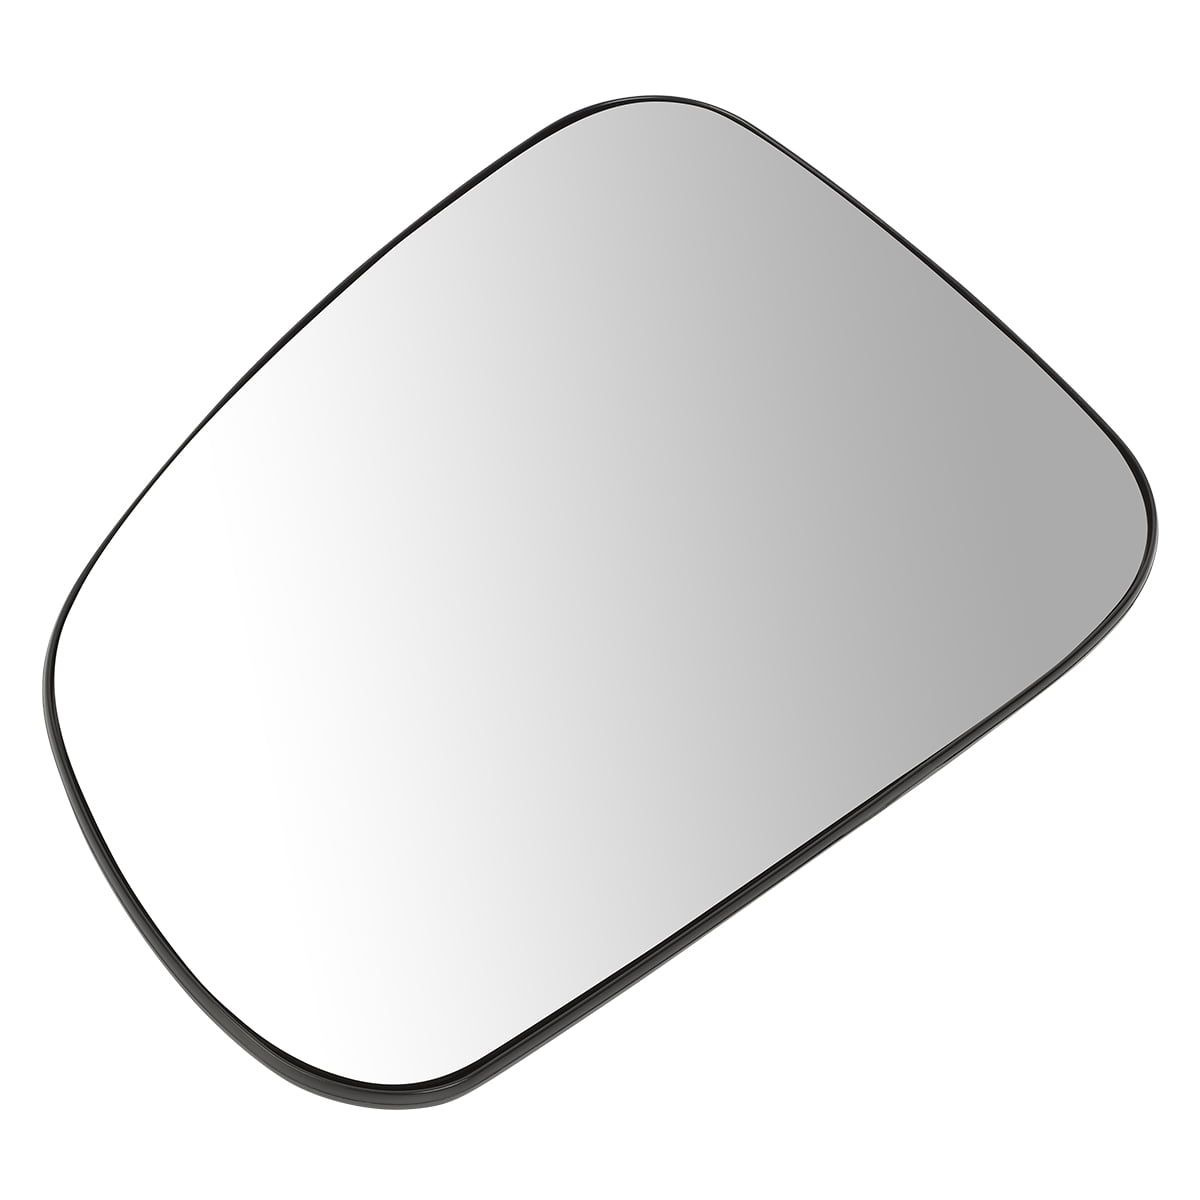 DNA Motoring OEM-MG-0256 19120302 OE Style Driver/Left Mirror Glass 